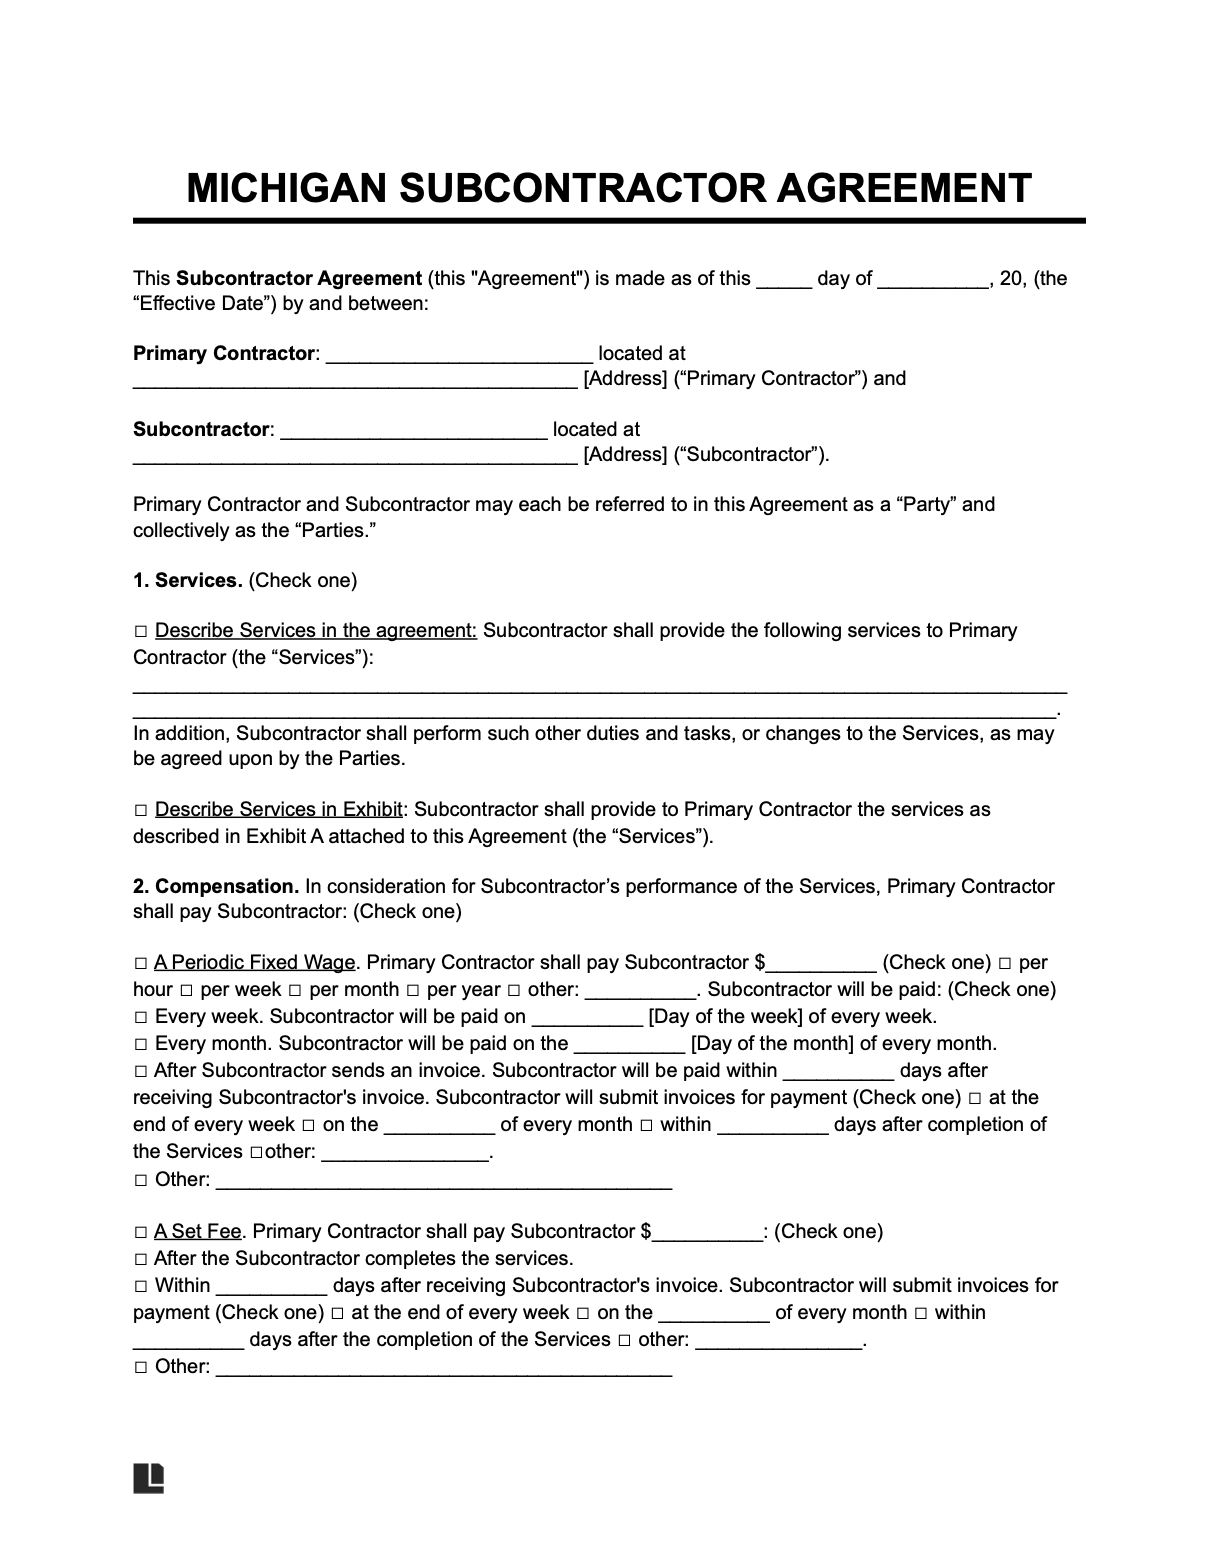 michigan subcontractor agreement template